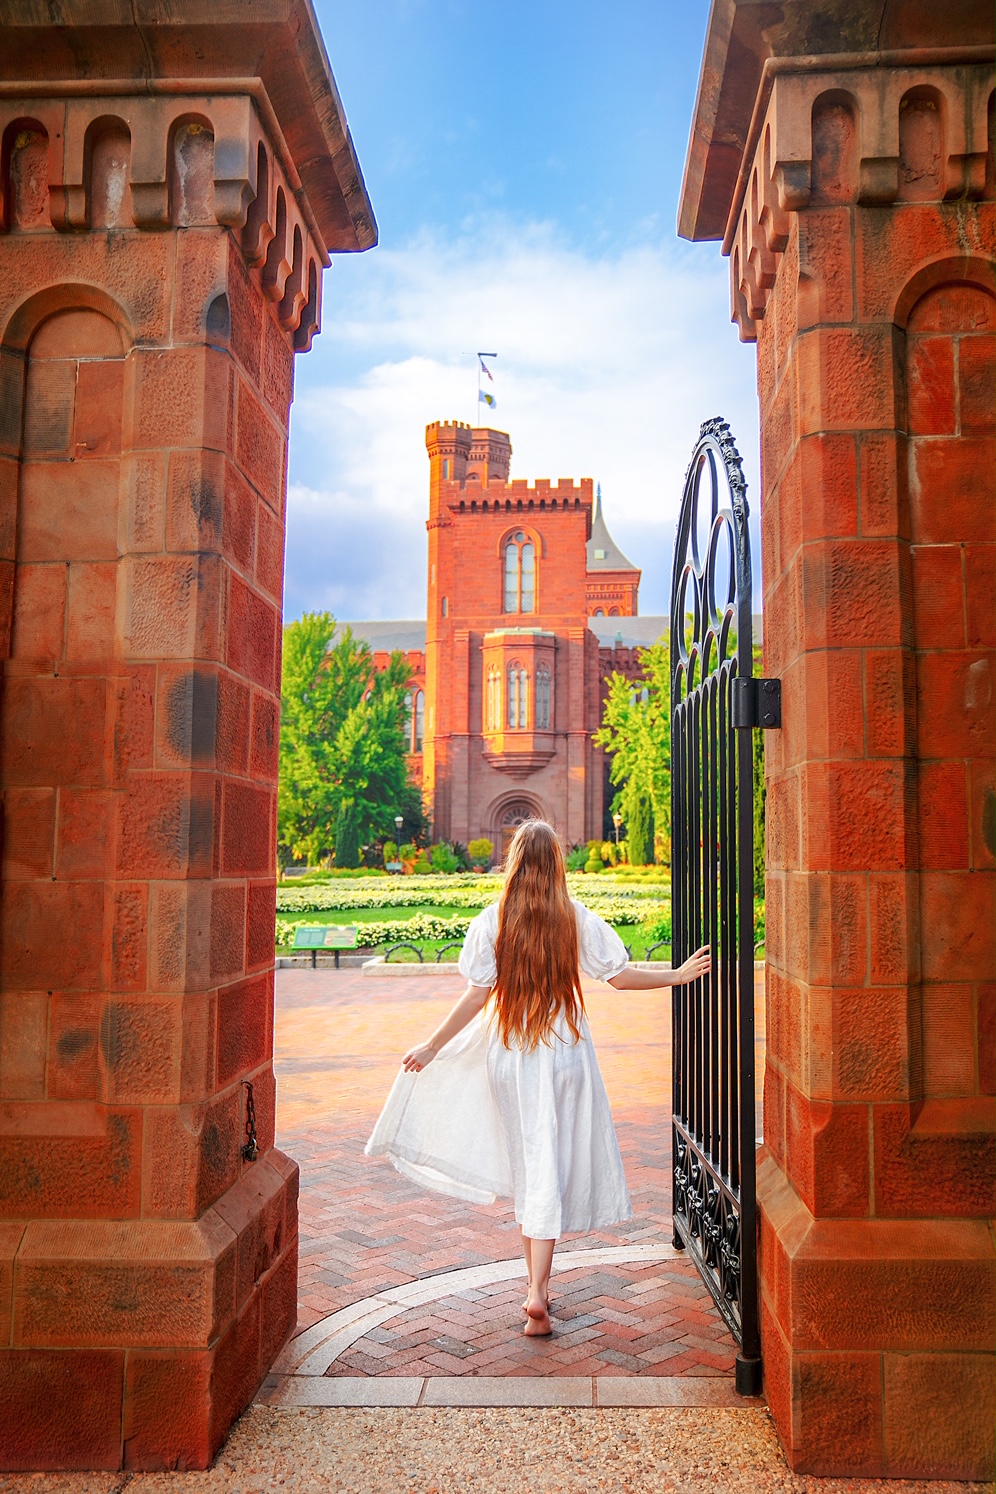 A woman in a white dress with long hair standing in the gated entrance of the Smithsonian Castle gardens. You can see a gothic style brick castle, rows of yellow flowers, and a brick pathway. It's one of the best things to see during a weekend in Washing